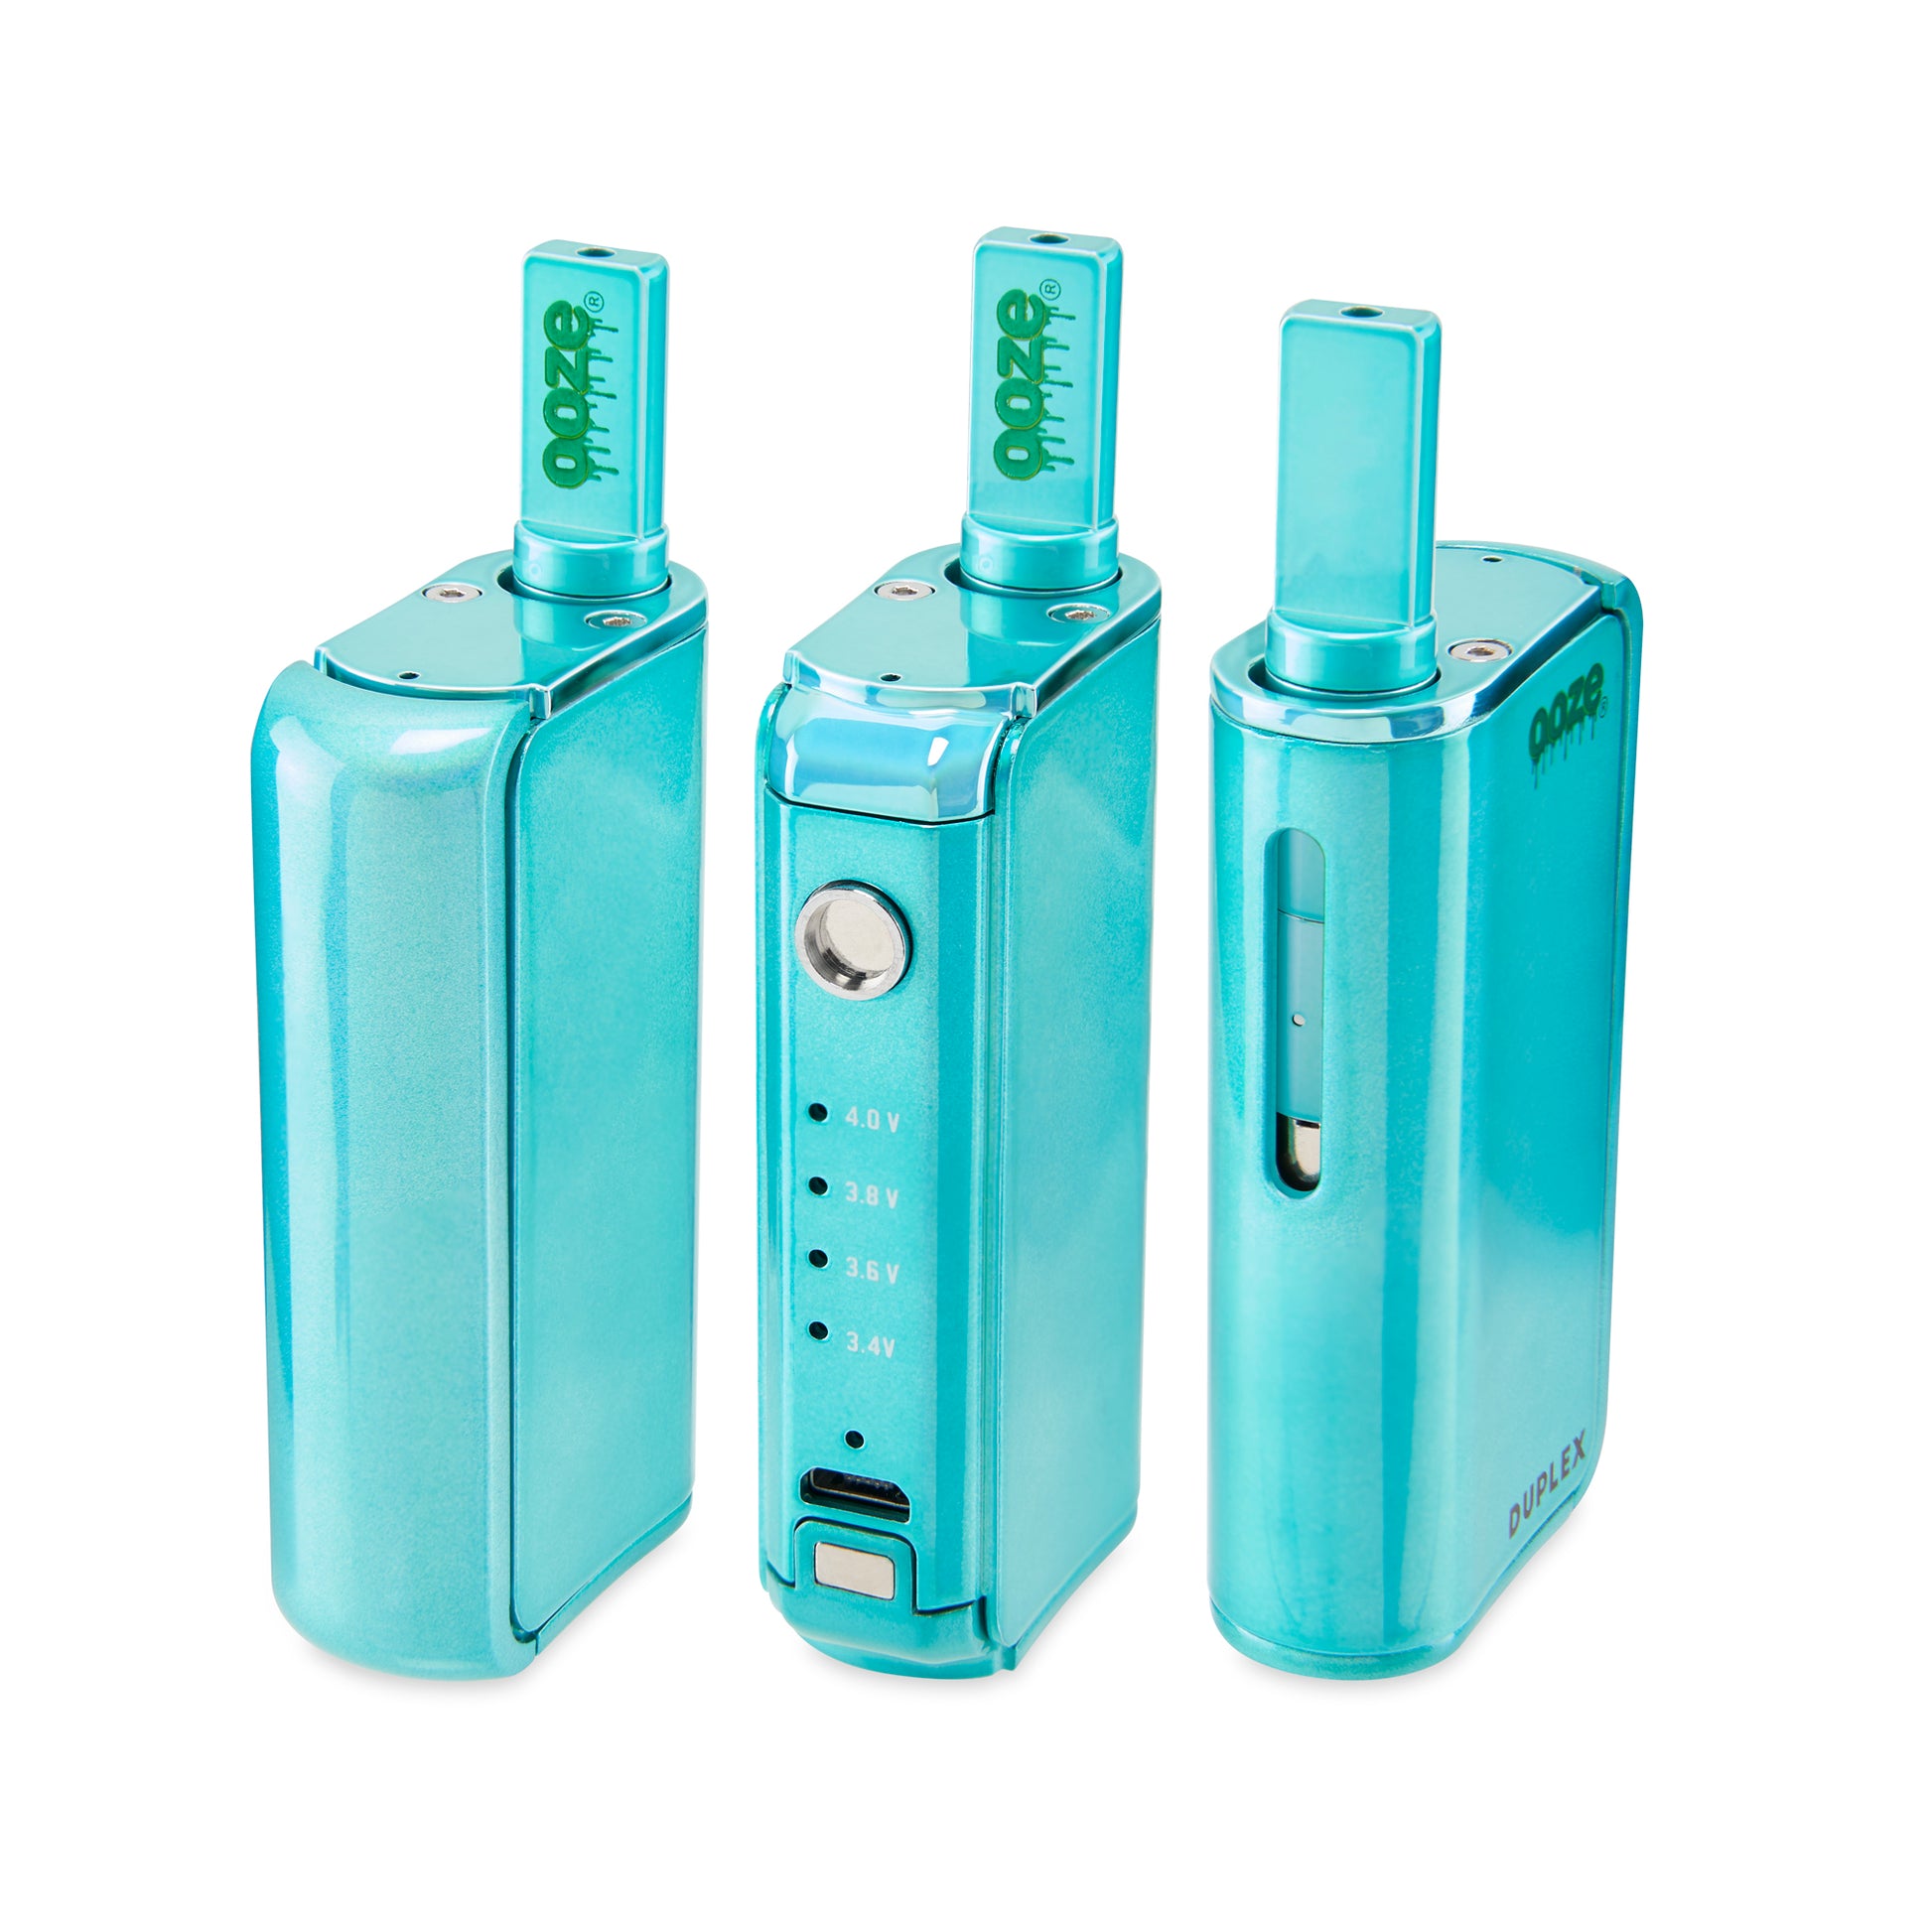 Three of the Arctic Blue Ooze Duplex Pro Vaporizers are shown in a row to show the trigger button. The left shows the device with the magnetic button on, the middle shows it removed, and the right shows the other end of the device.